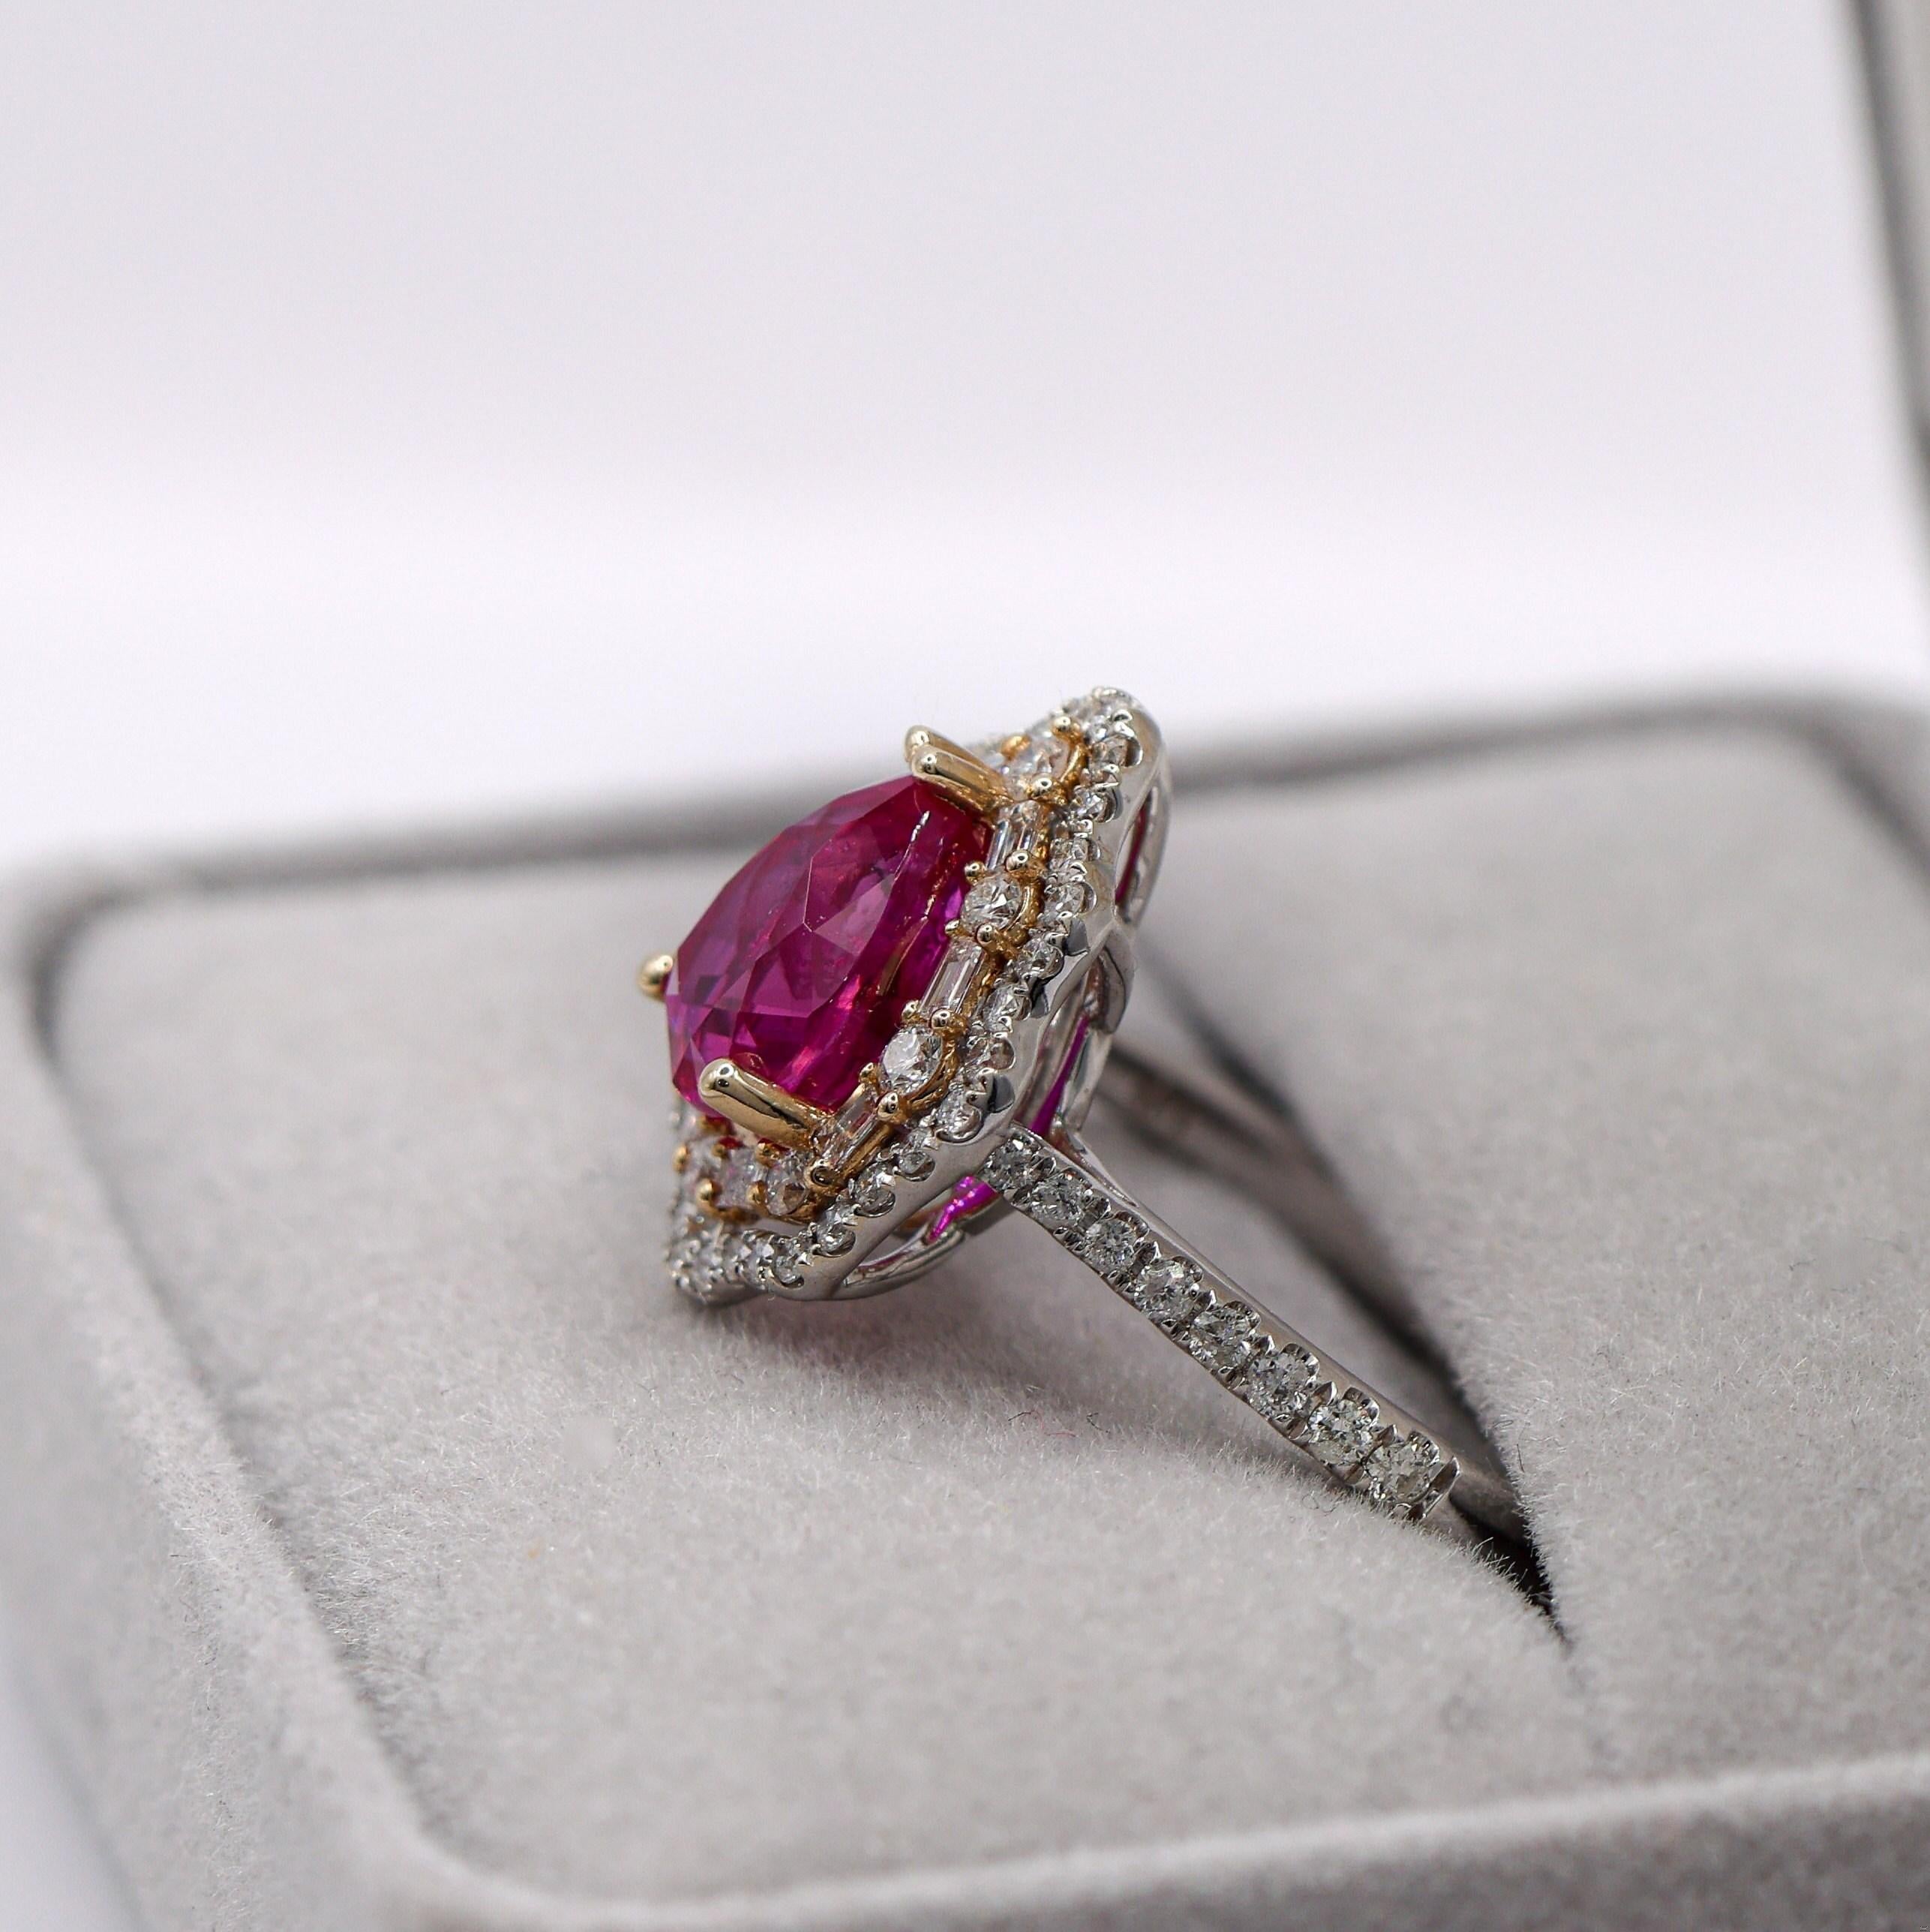 2ct Mozambique Ruby Ring w Natural Diamonds in Solid 14K Dual Tone Gold Pear Cut